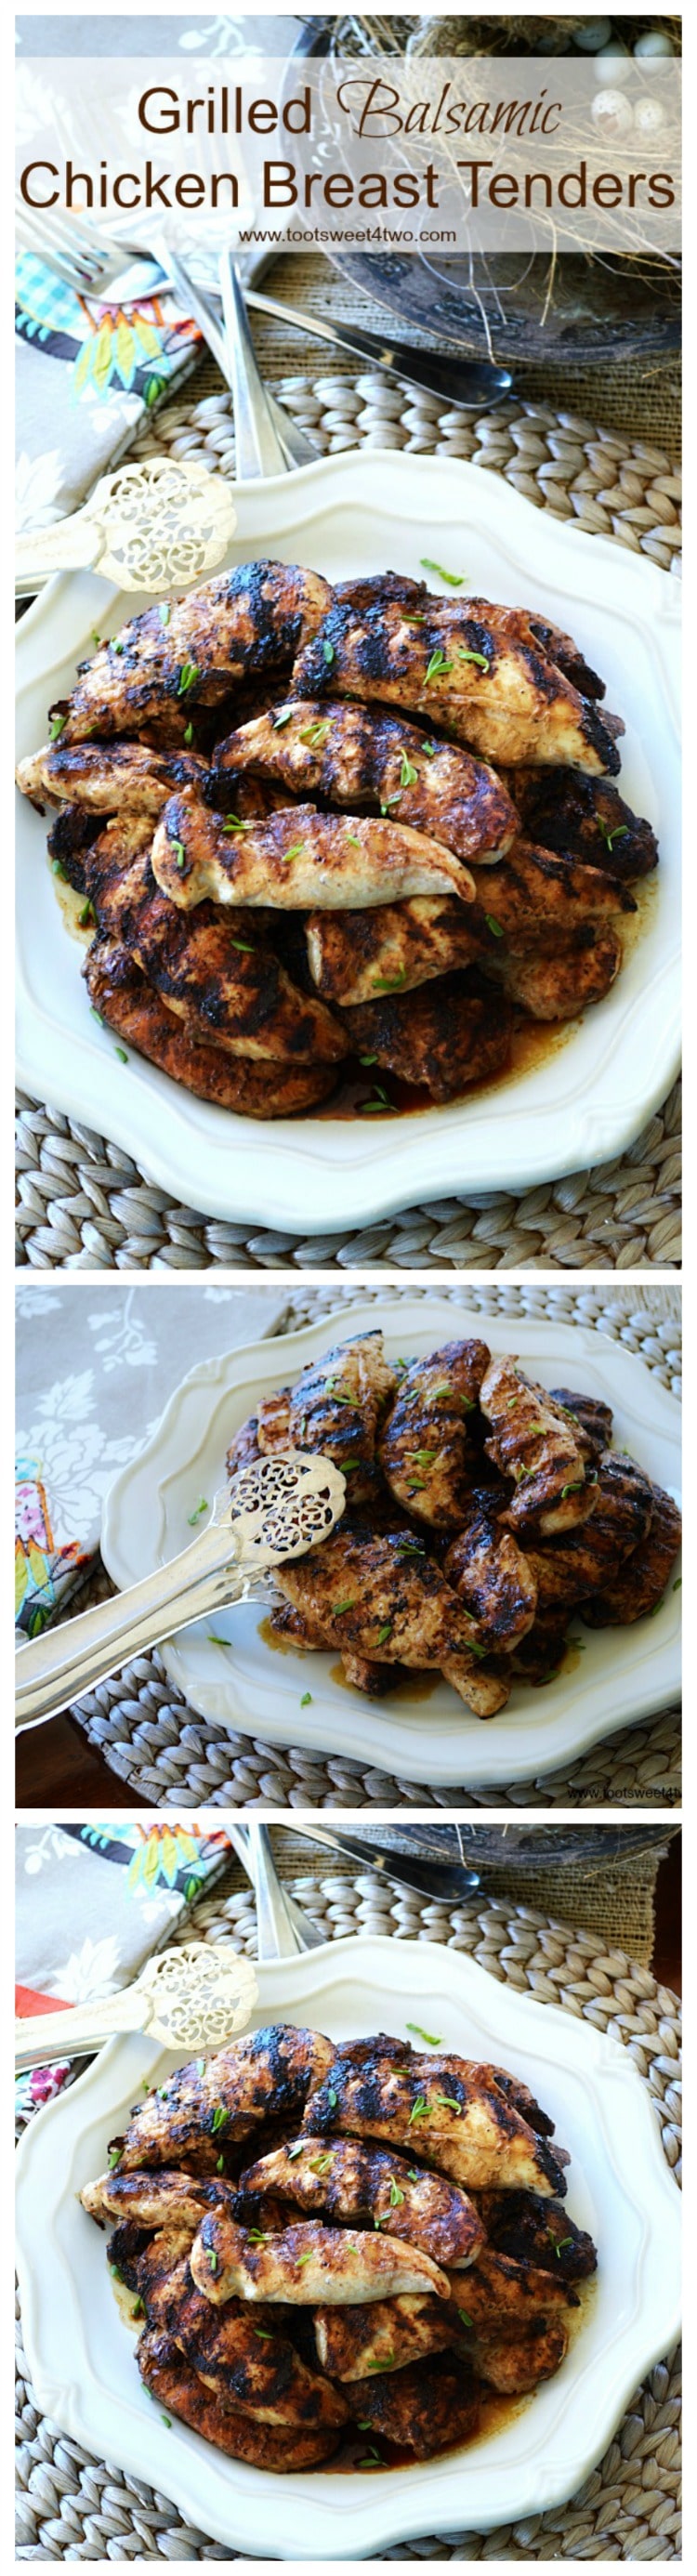 Grilled Balsamic Chicken Breast Tenders are so ridiculously easy to make and delicious! This super simple recipe is a quick and healthy alternative to a fast food dinner any night of the week. Make a batch and keep them in the refrigerator for an instant meal or an easy sandwich or add them to a salad. | www.tootsweet4two.com.